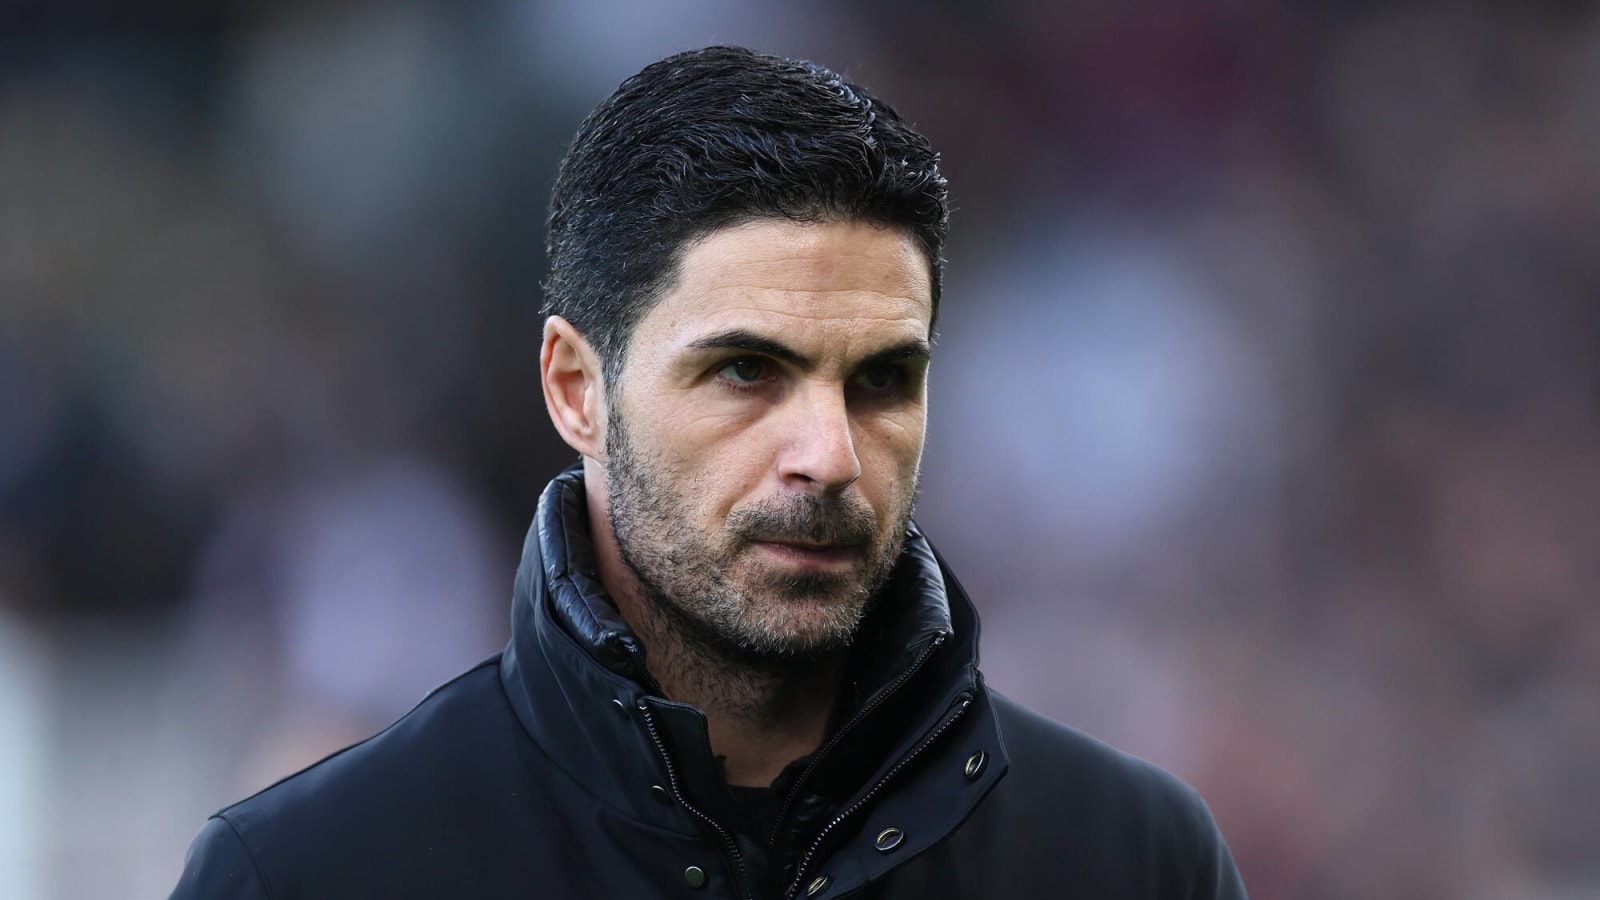 Could Mikel Arteta be the next Barcelona manager?